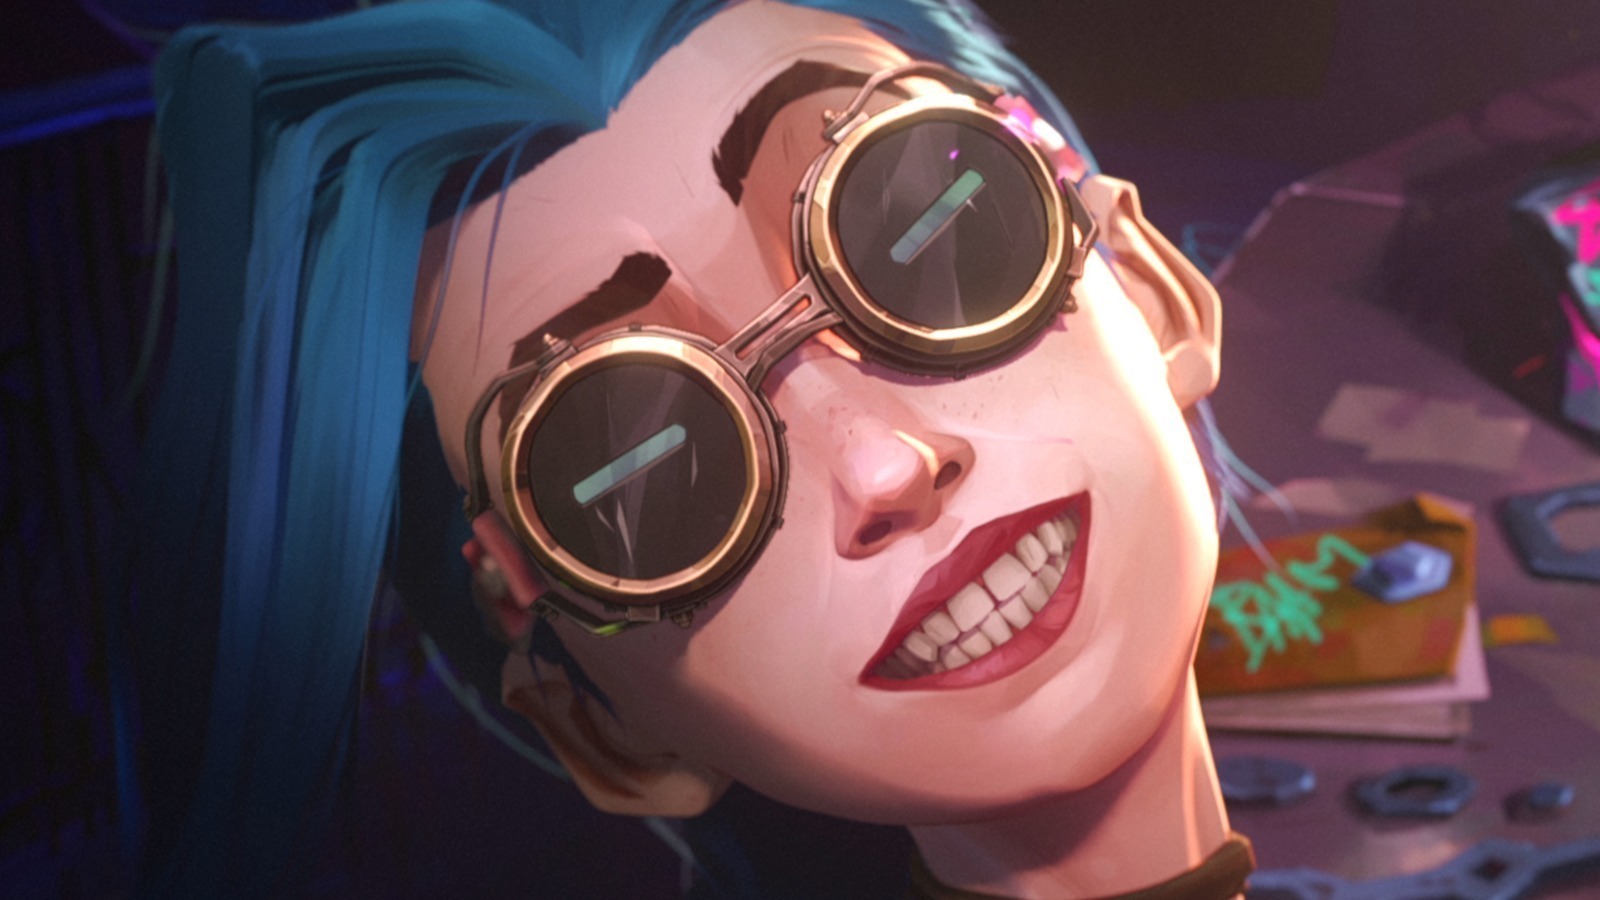 10 Things You Might Not Have Noticed About Jinx In Arcane